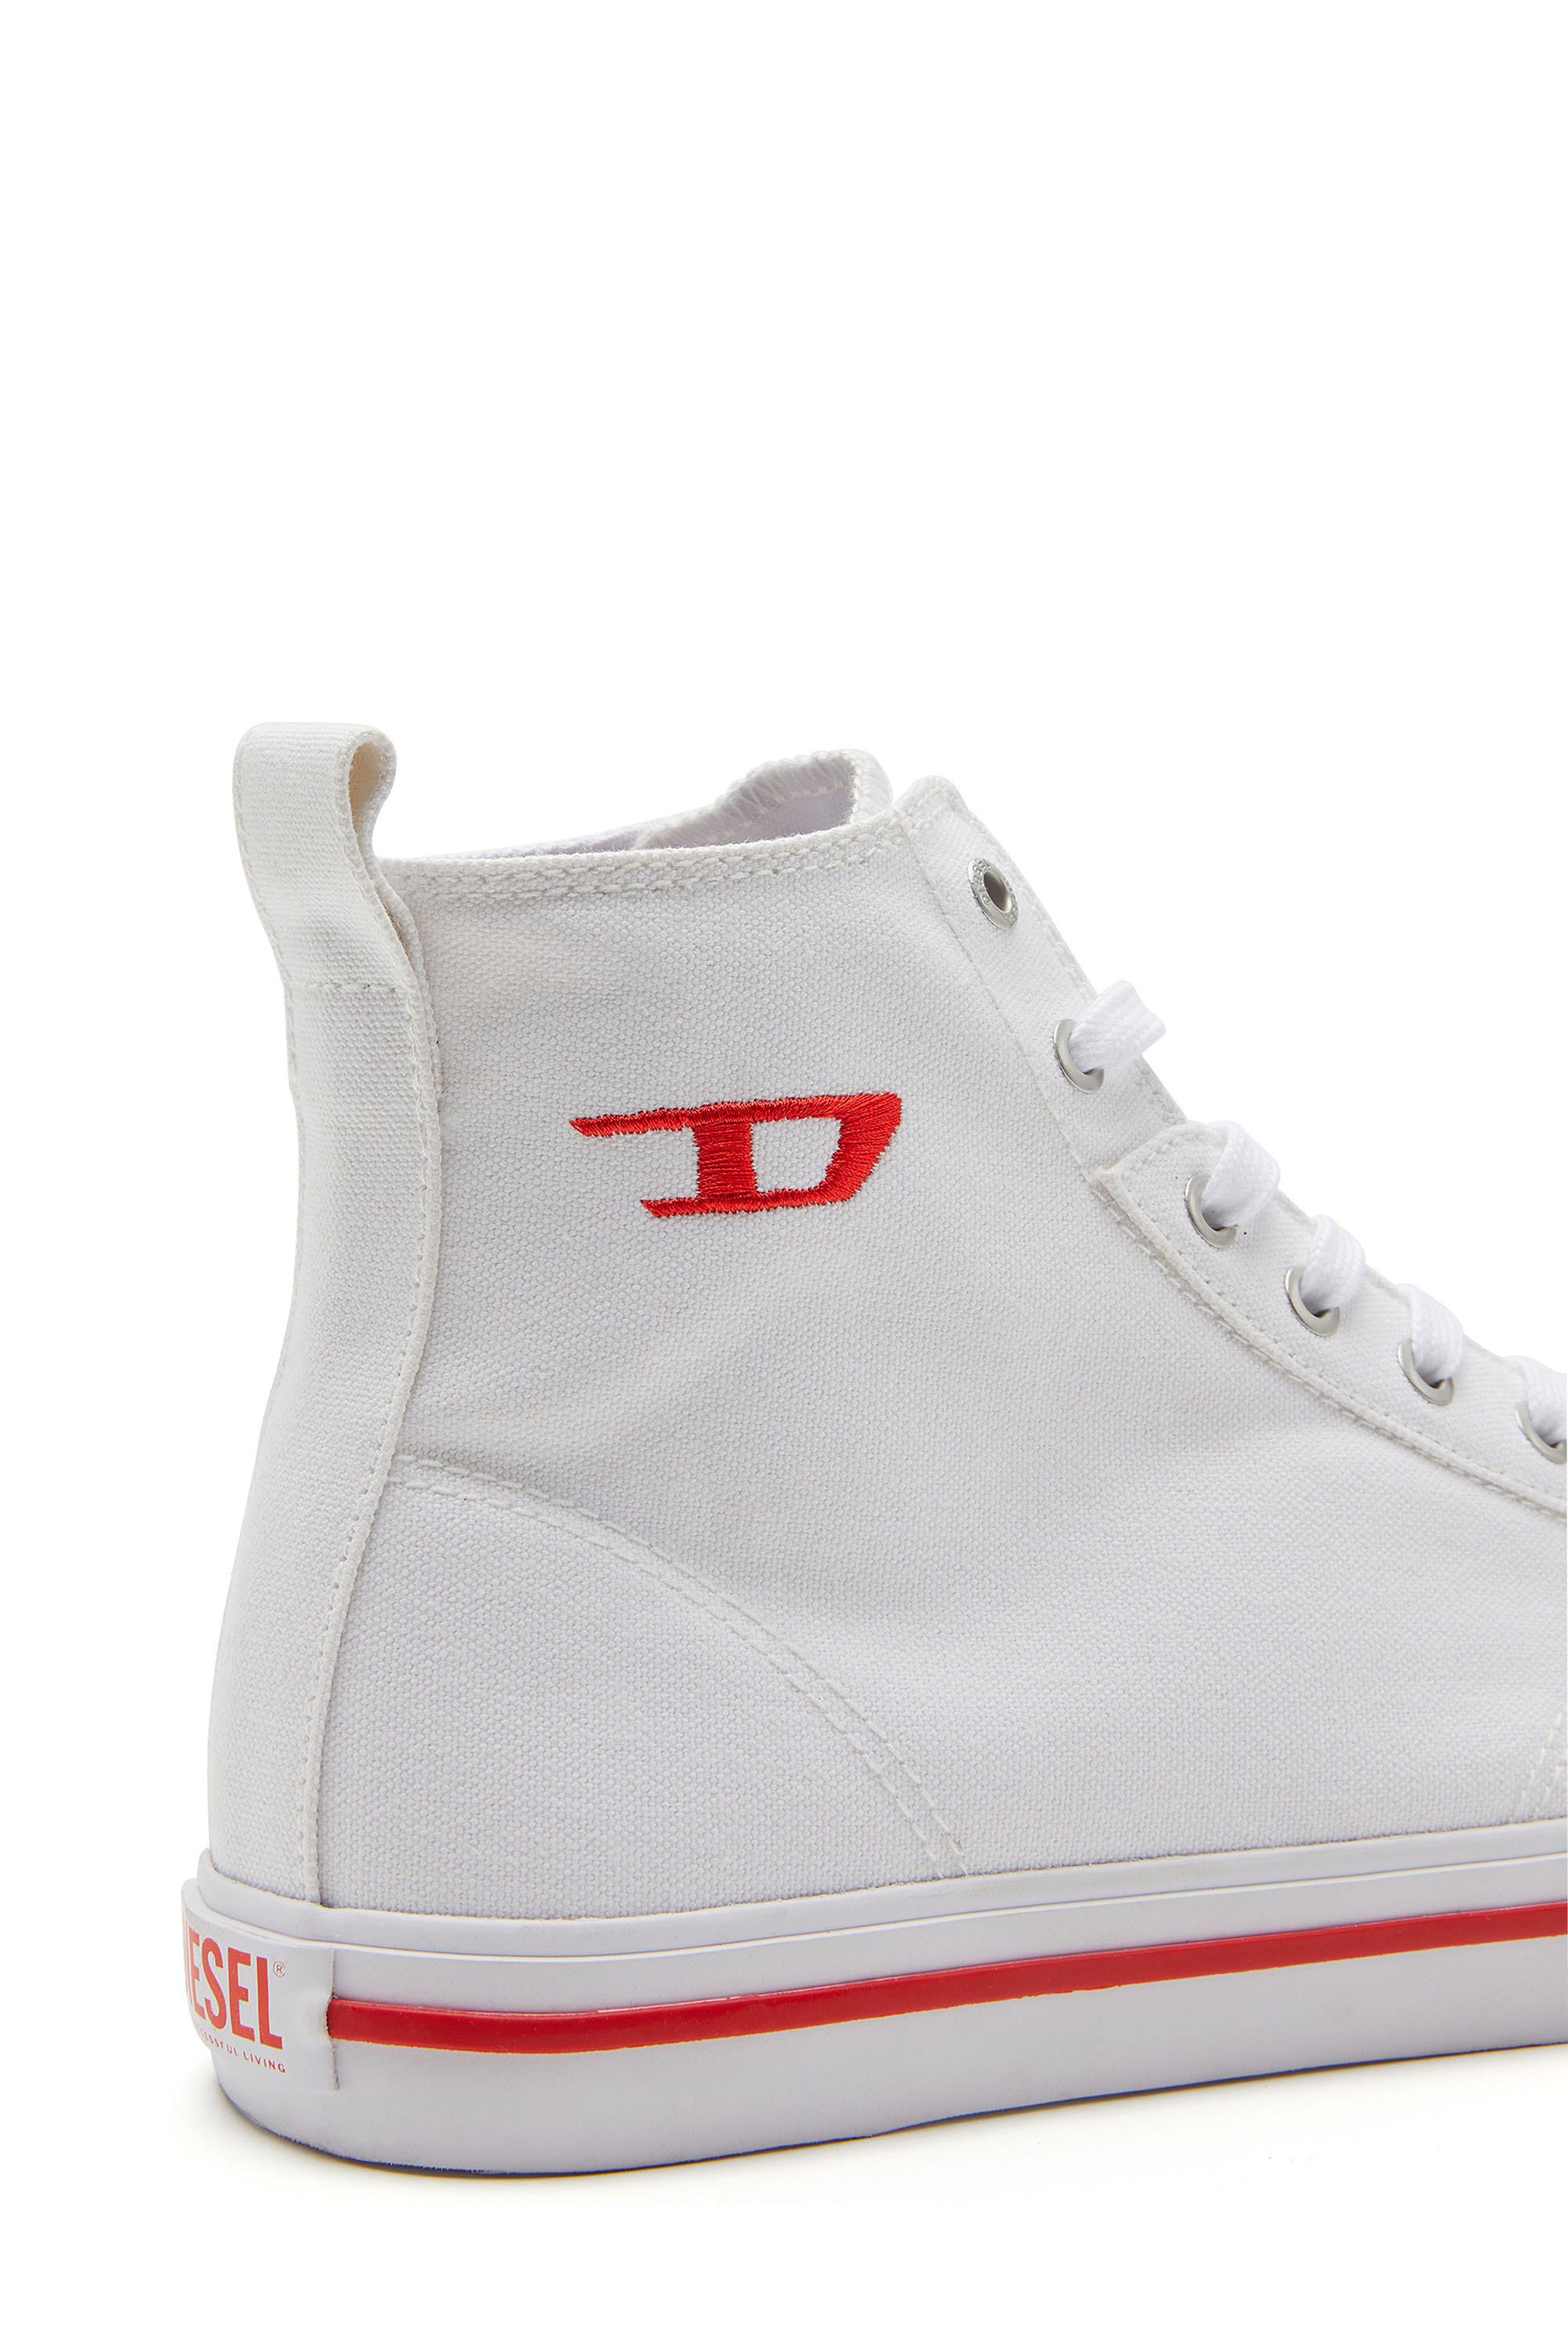 Diesel - S-ATHOS MID, Weiss/Rot - Image 6